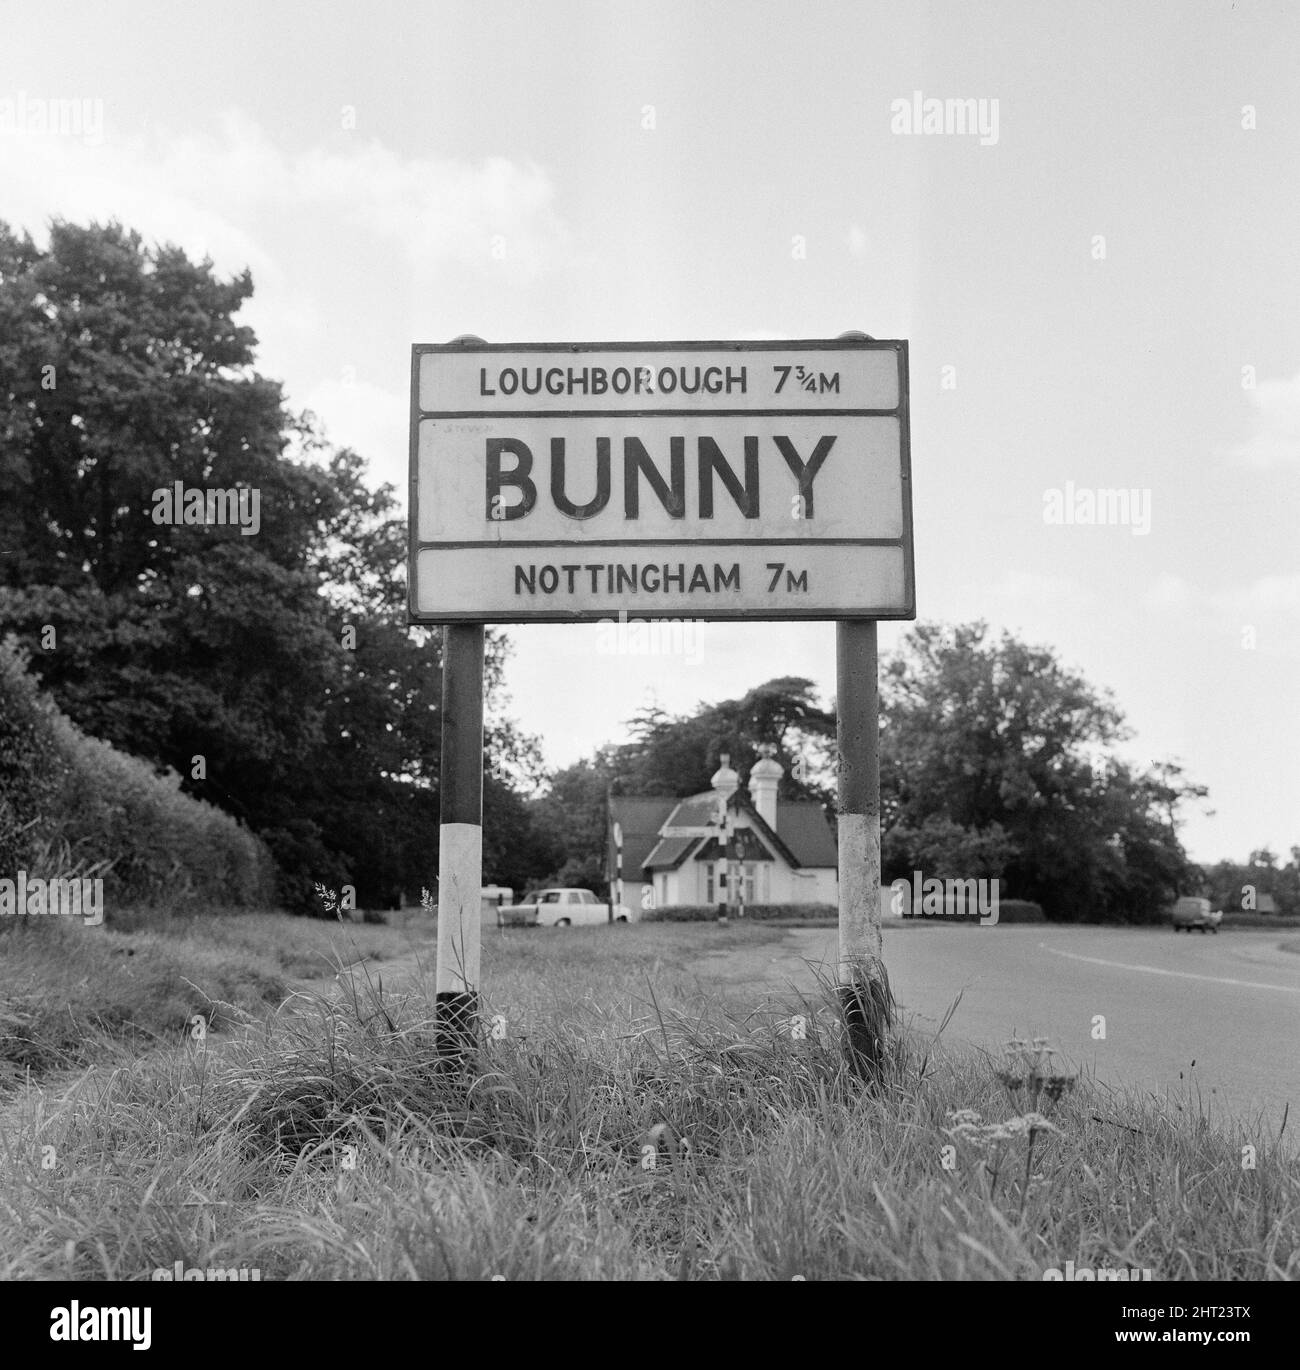 Bunny Girls from the Playboy Club in London visit Bunny, a village and civil parish in the Rushcliffe borough of Nottinghamshire, England, 4th August 1966. Our Picture Shows ... Bunny Village Sign. Stock Photo